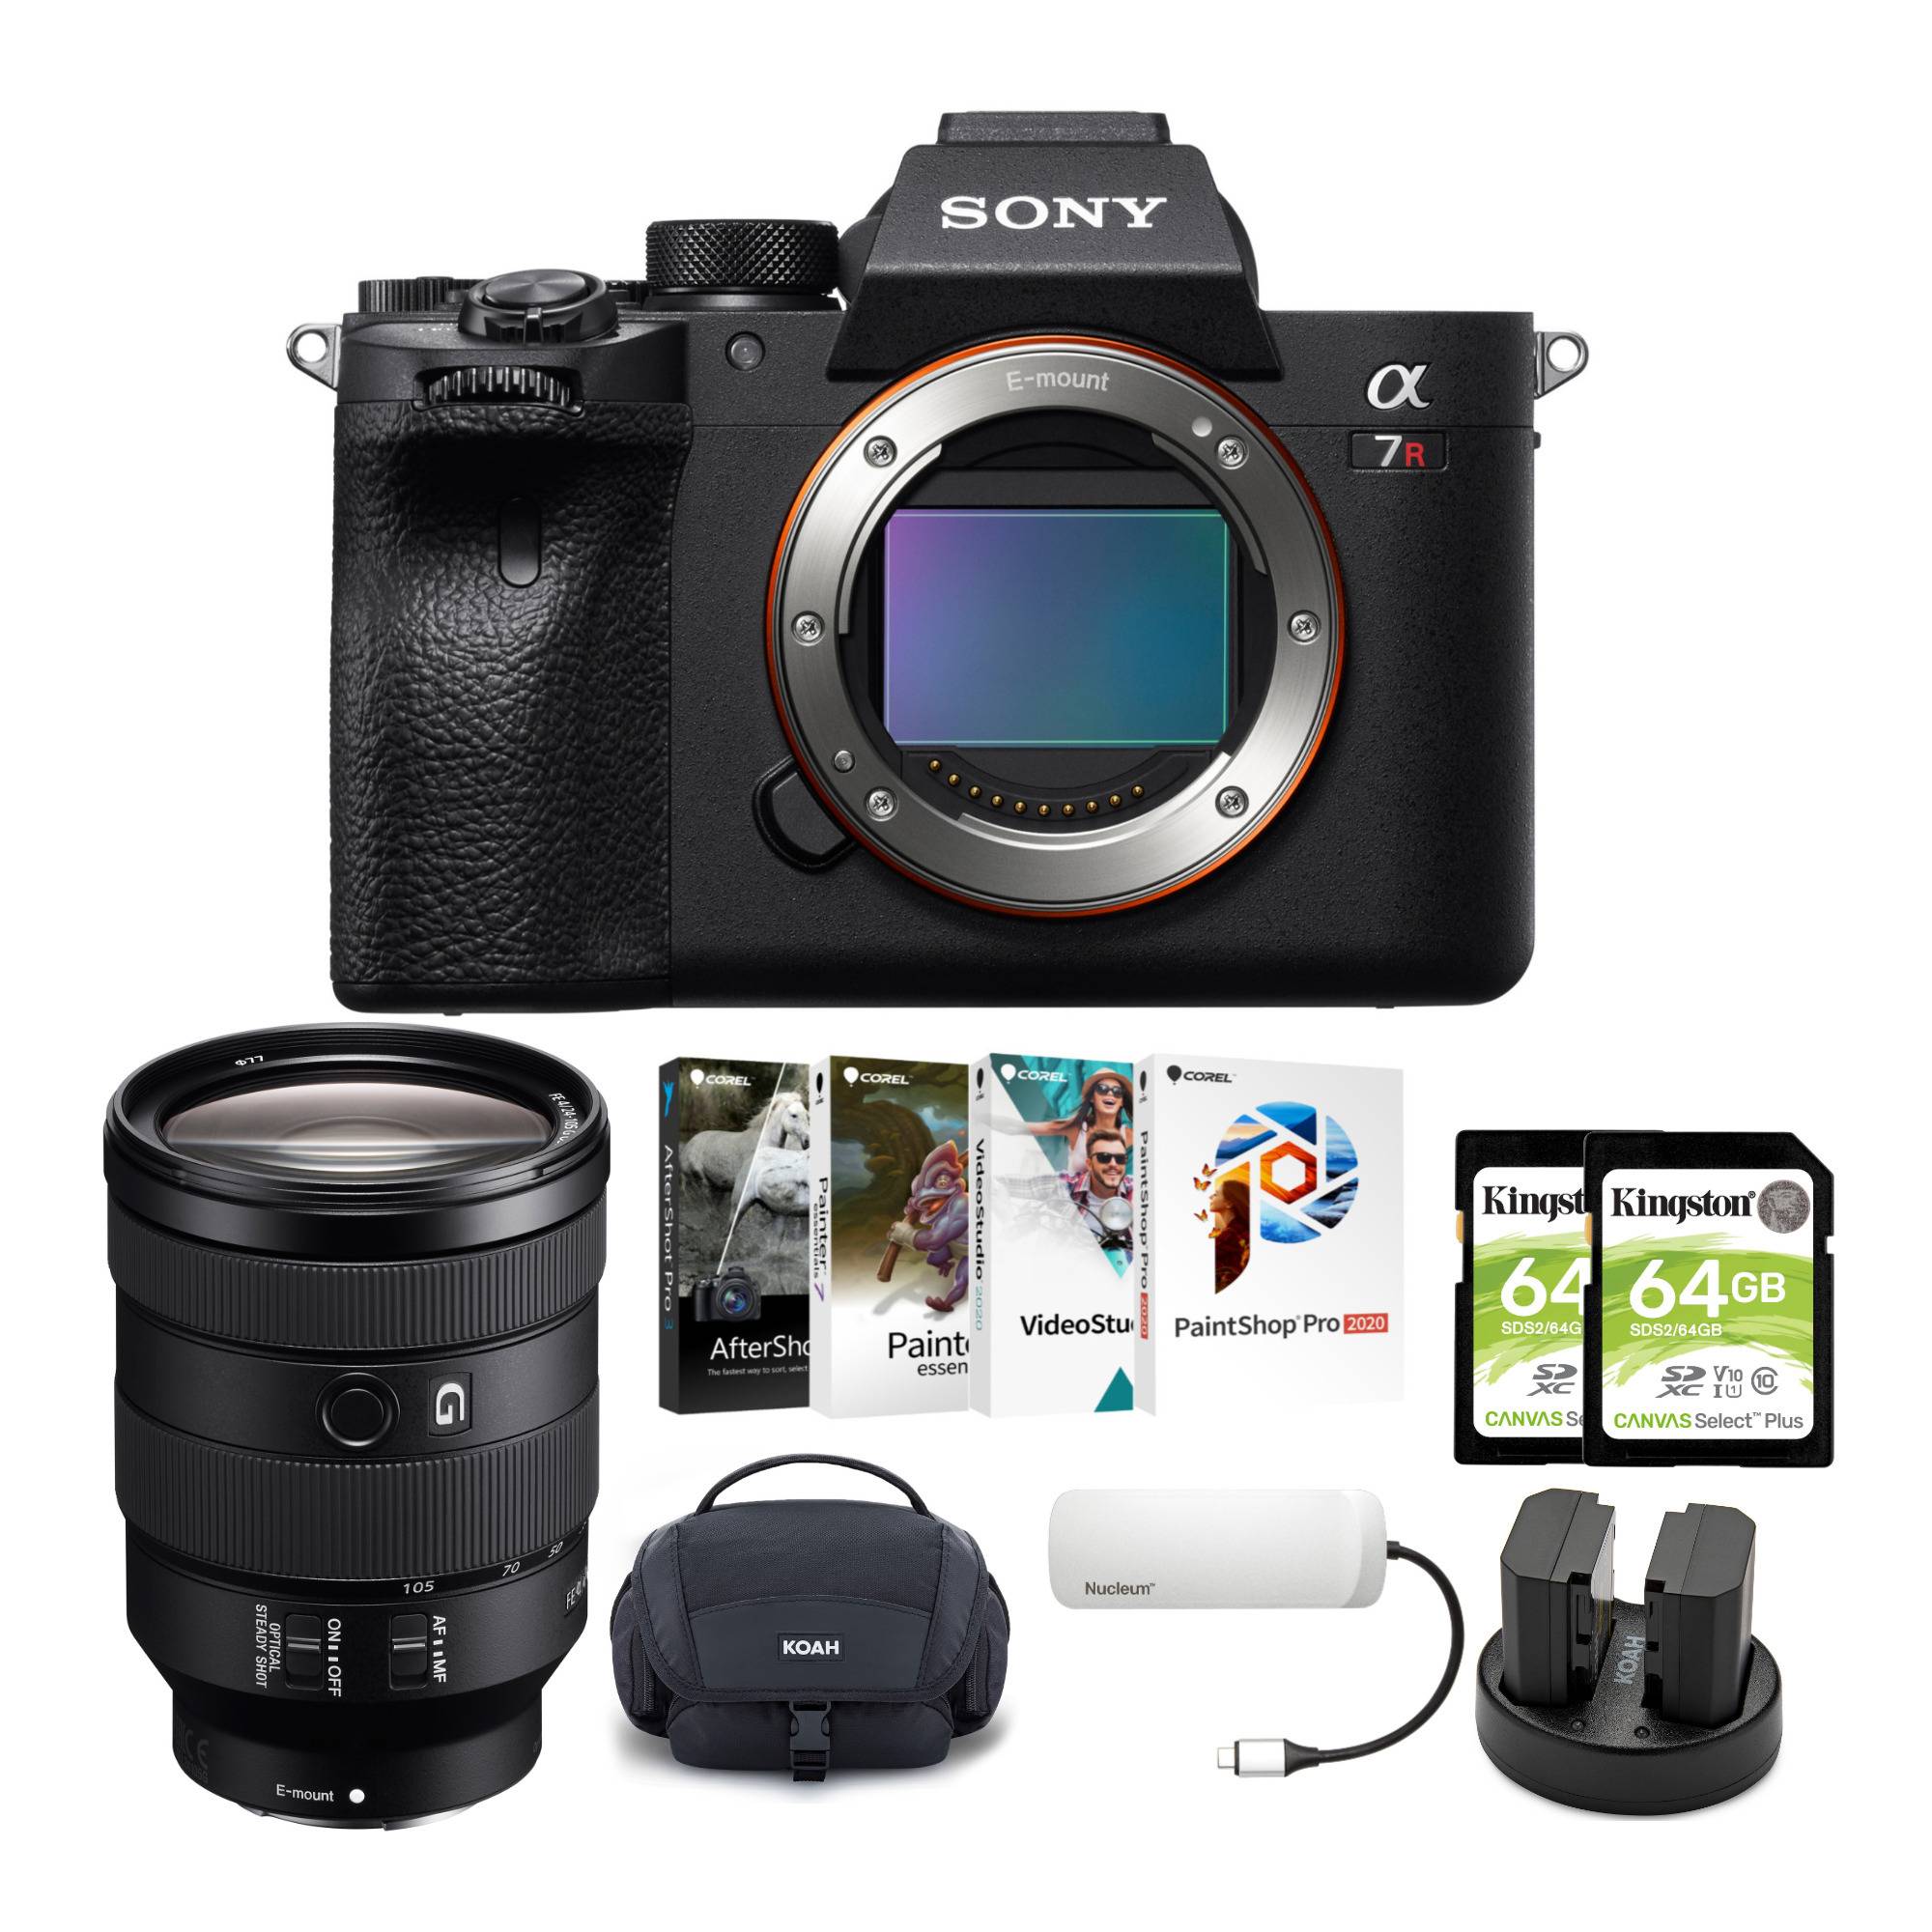 Sony Alpha a7R IV A Mirrorless Digital Camera Body with 24-105mm f/4 Lens and Software Suite